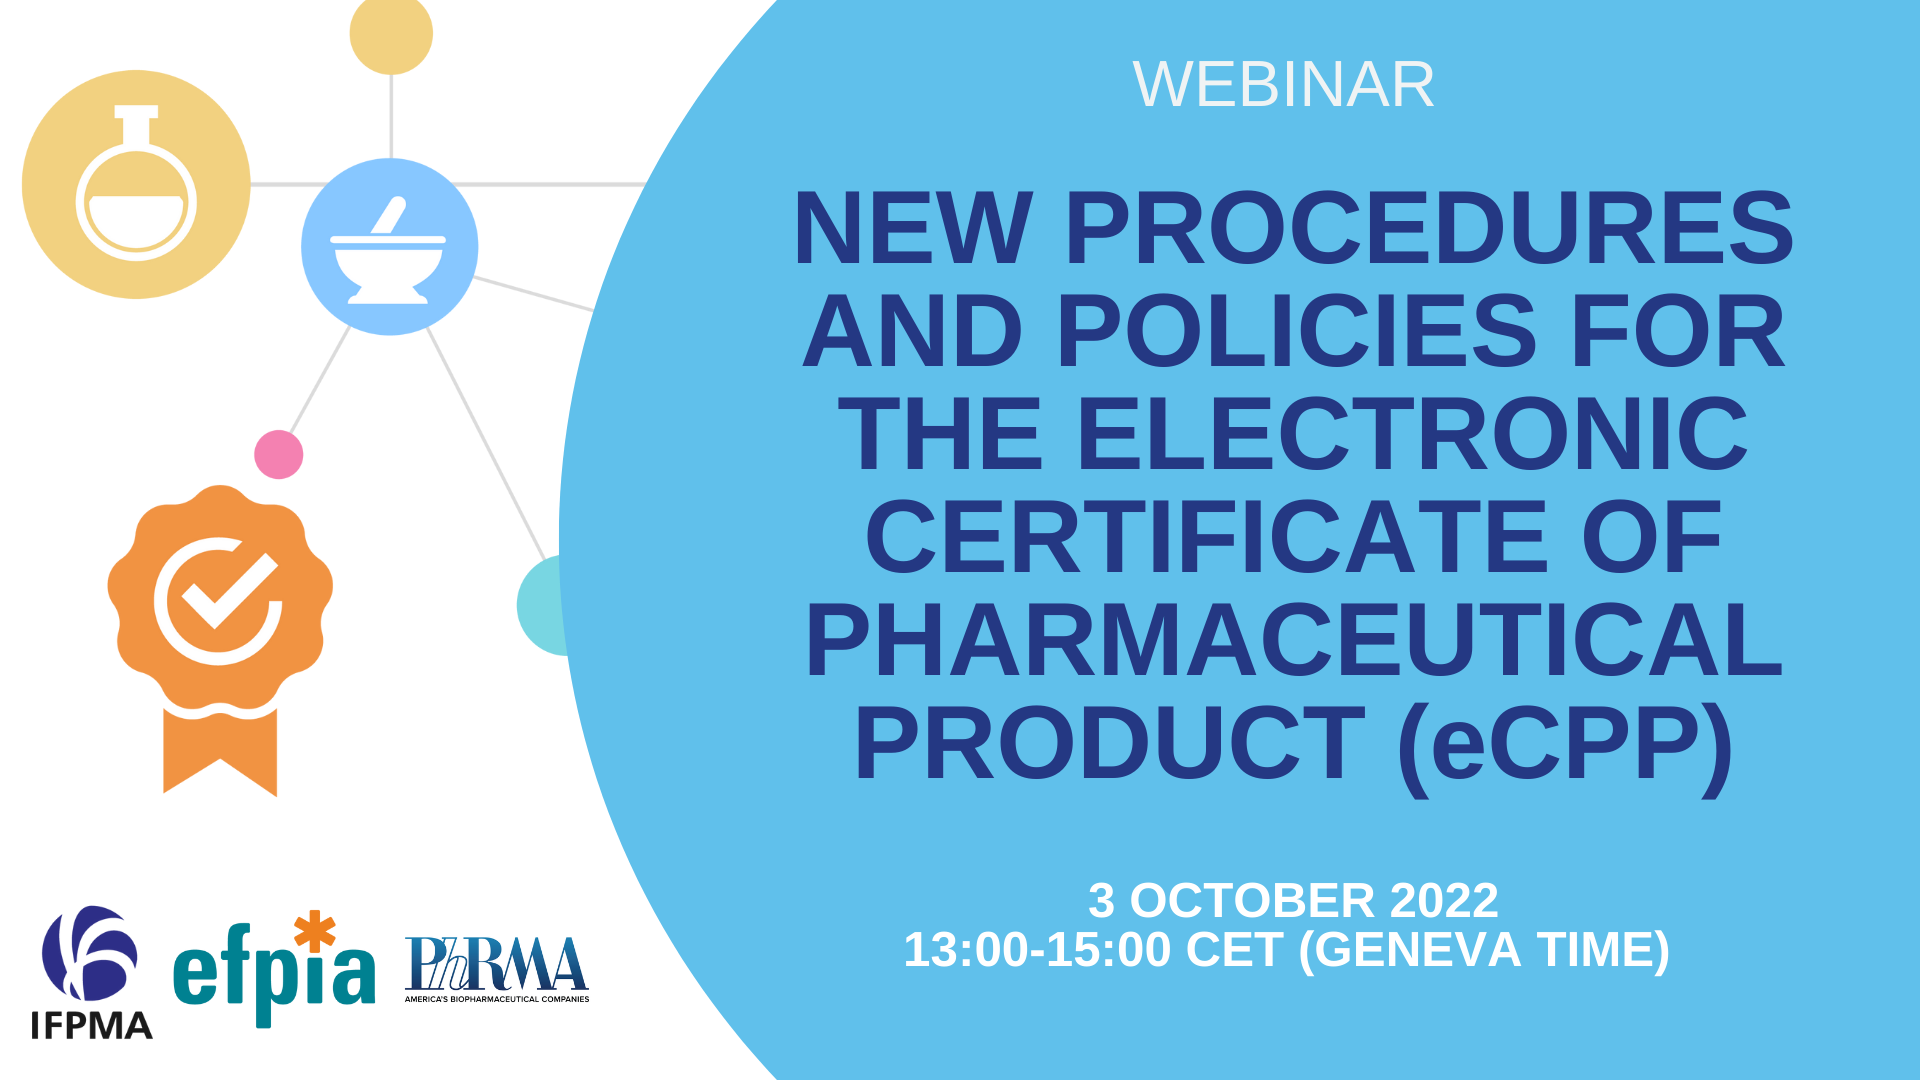 New procedures and policies for the electronic Certificate of Pharmaceutical Product (eCPP)